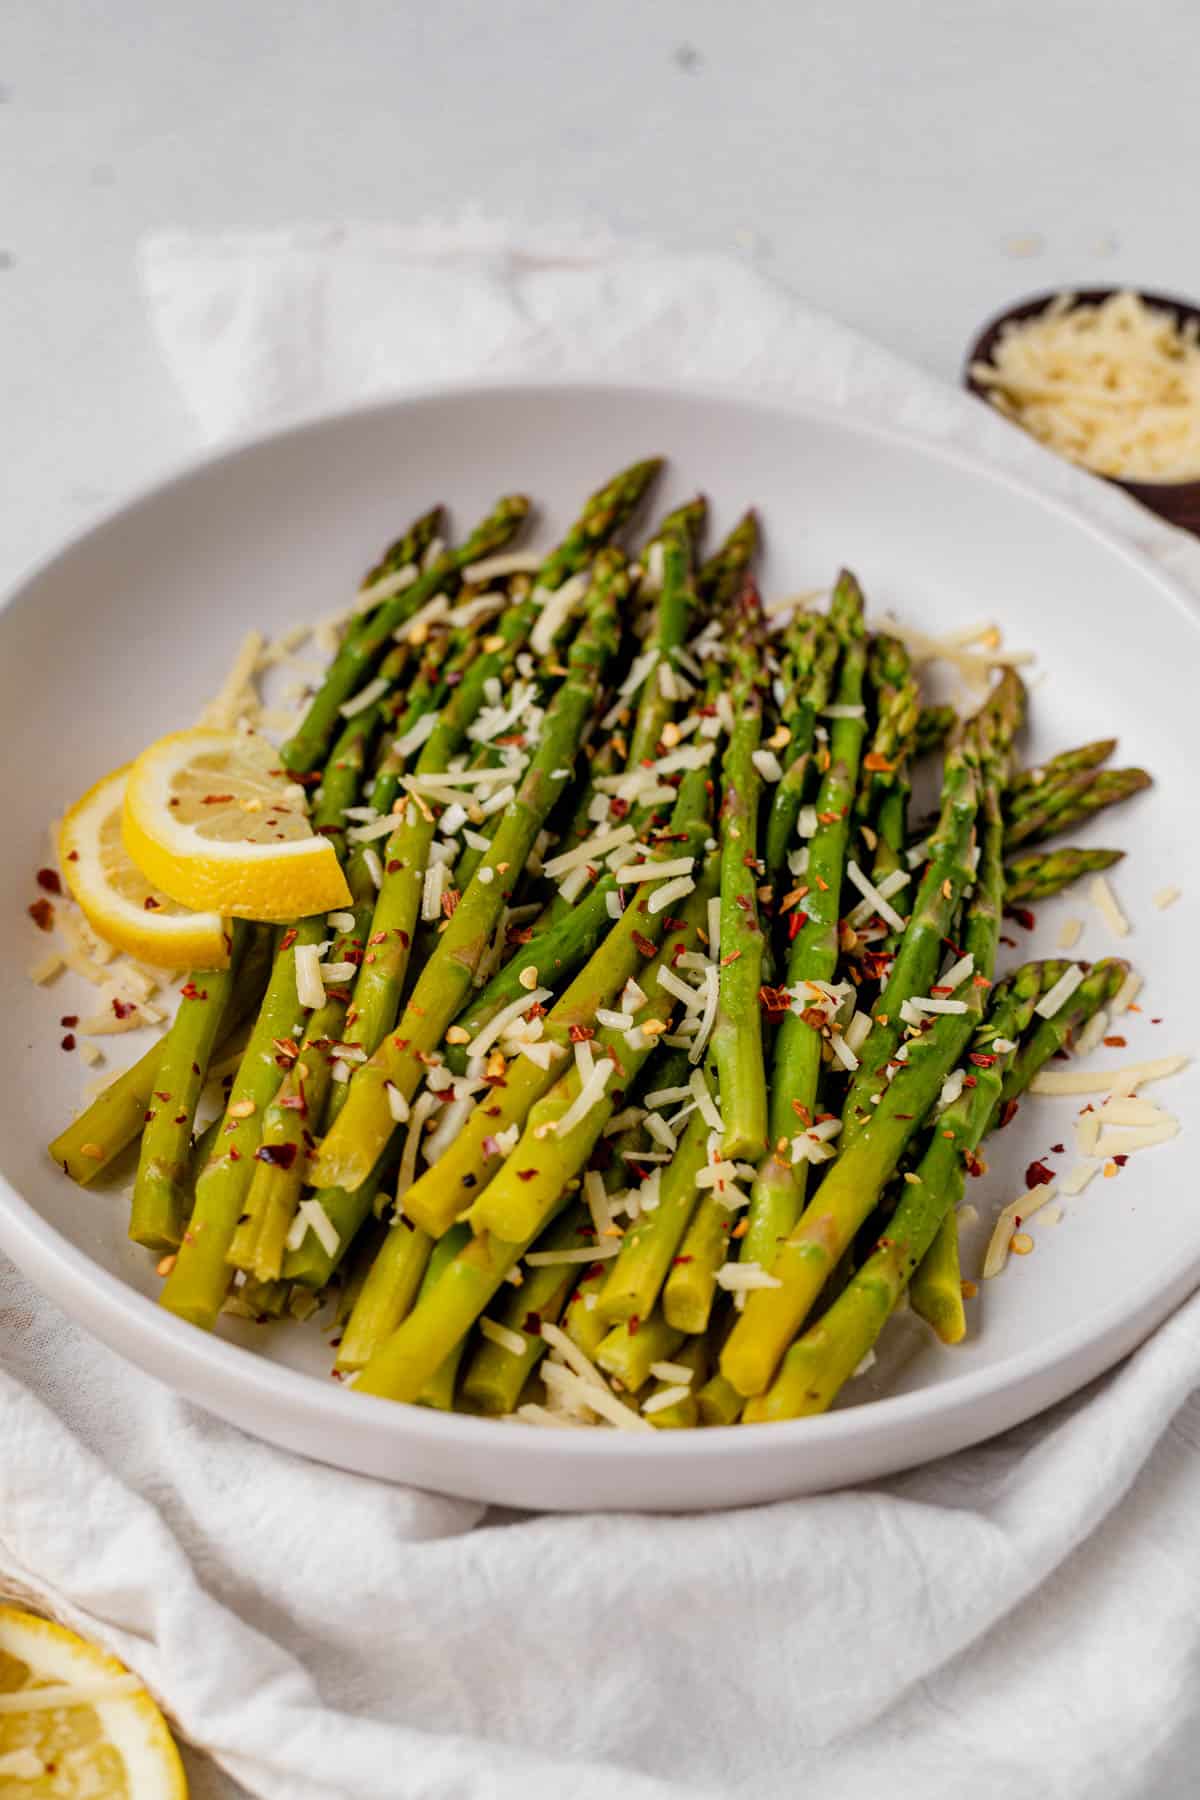 instant pot asparagus with red pepper flakes and parmesan cheese